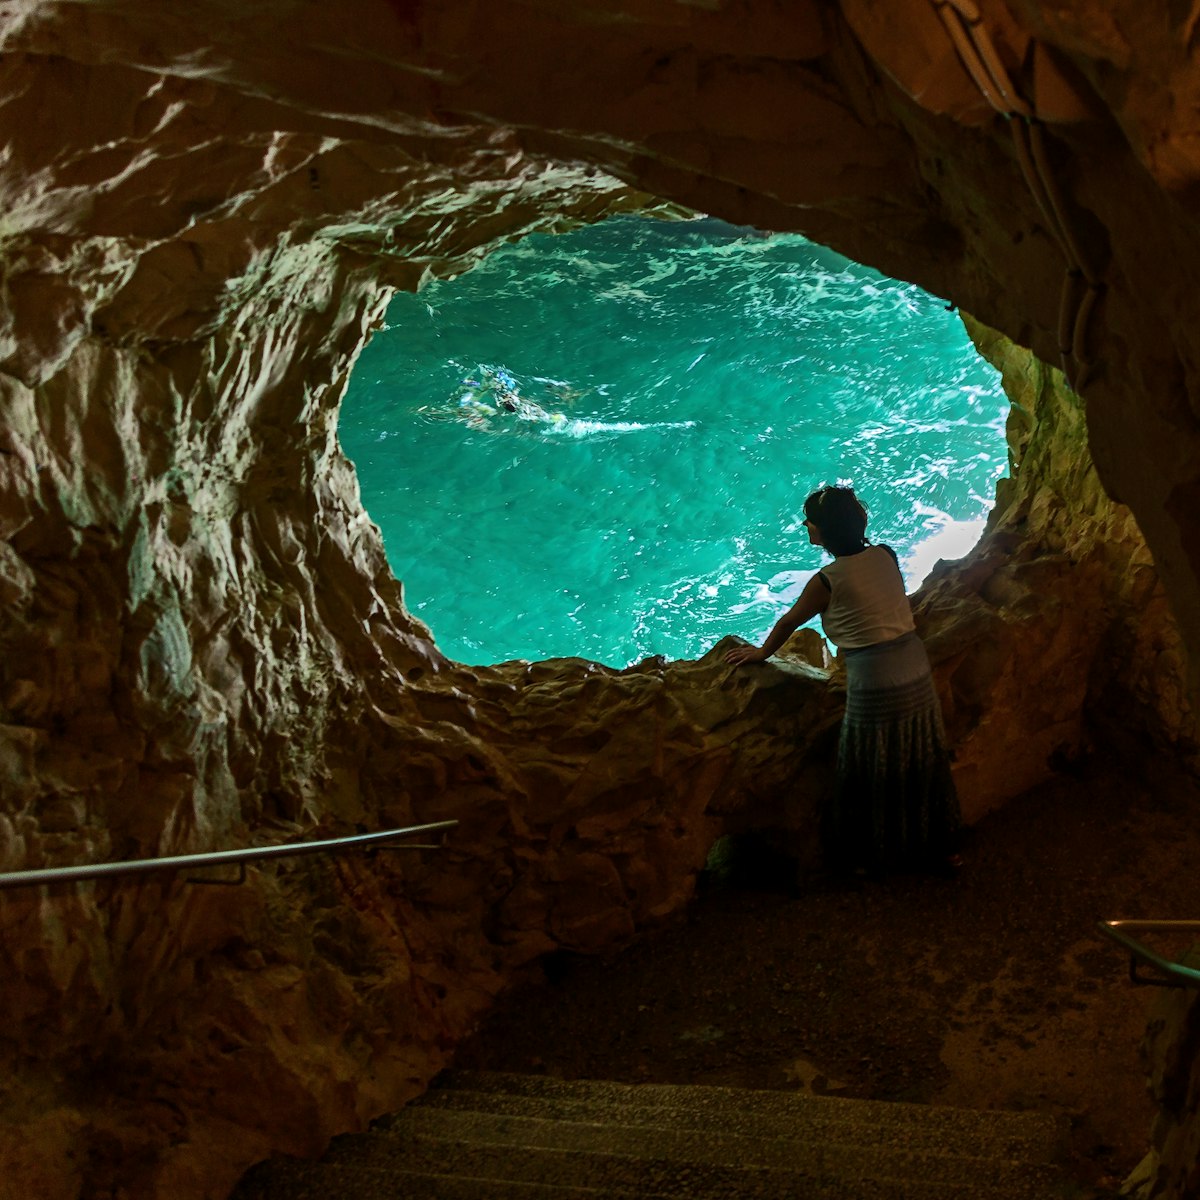 A sea cave at Rosh Hanikra - Israel; Shutterstock ID 143627812; Your name (First / Last): Lauren Keith; GL account no.: 65050; Netsuite department name: Online Editorial; Full Product or Project name including edition: Israel Update 2017